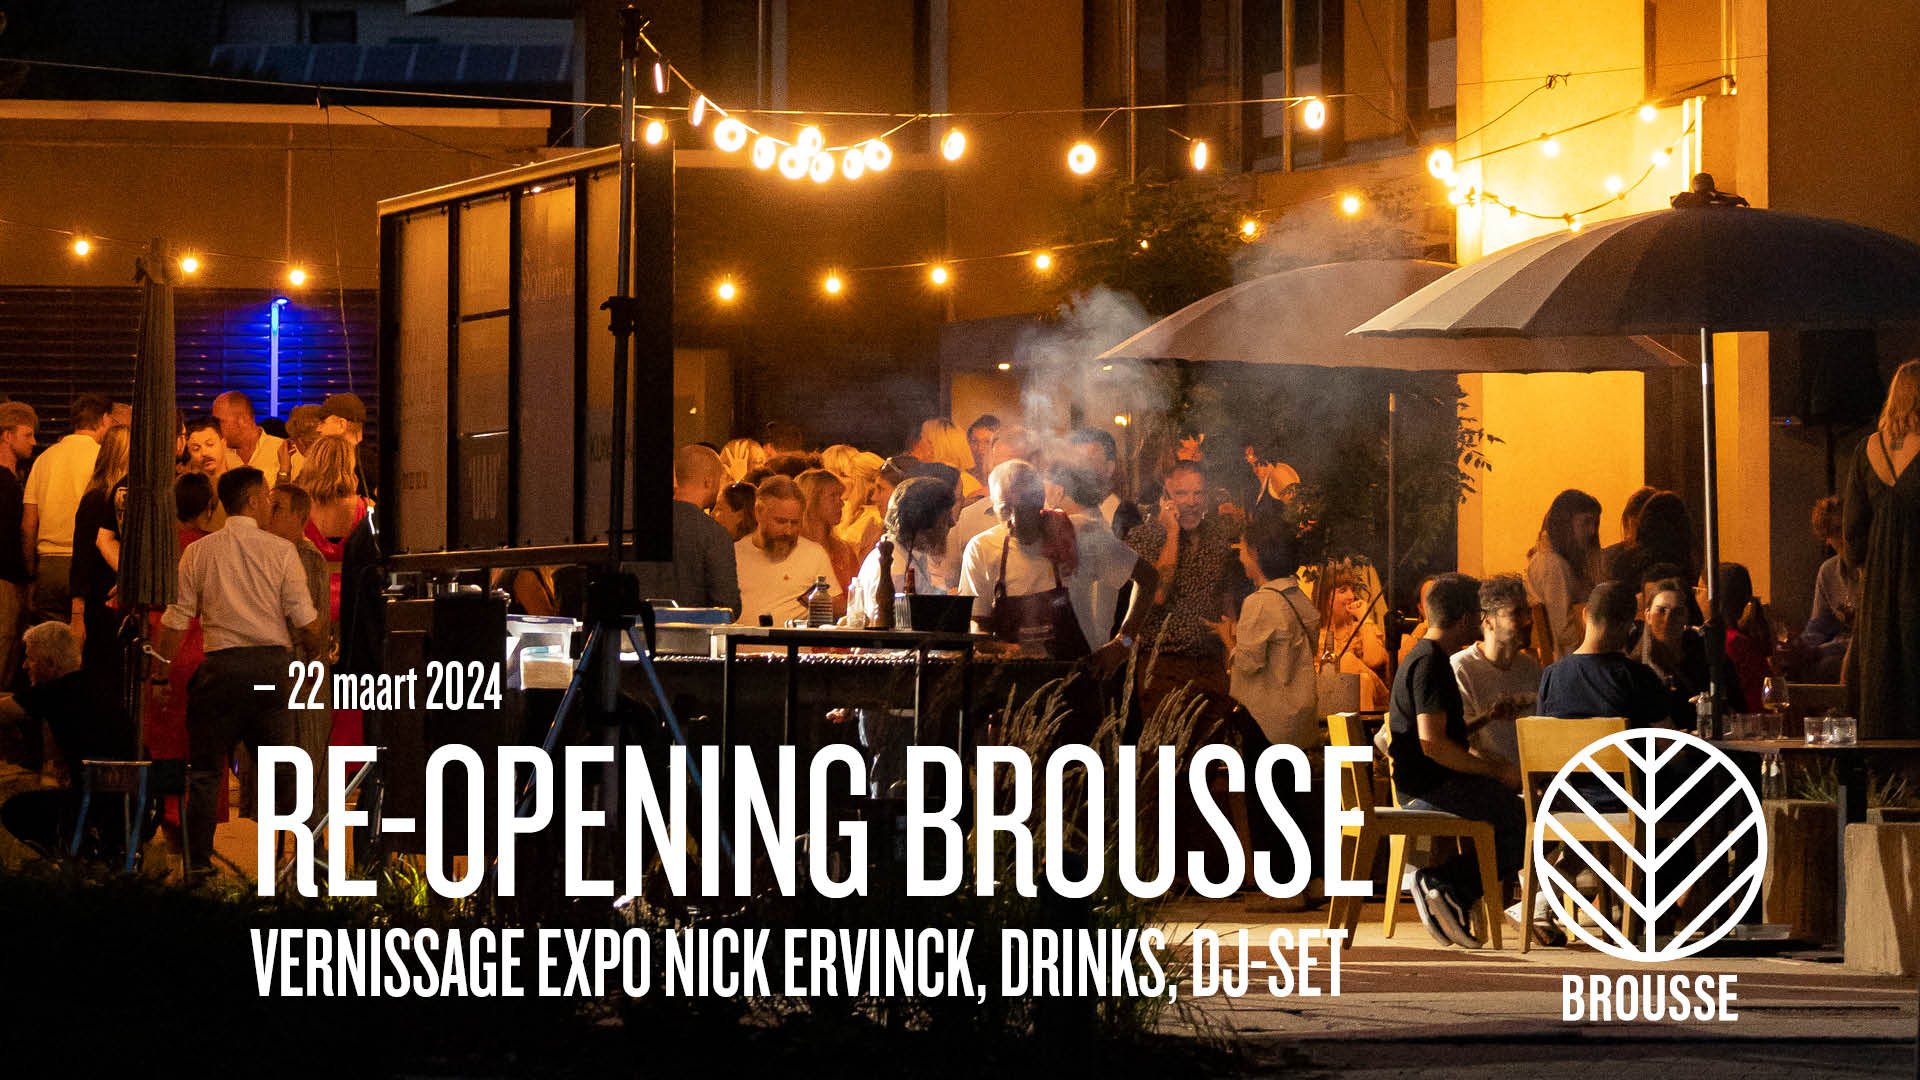 Brousee reopening